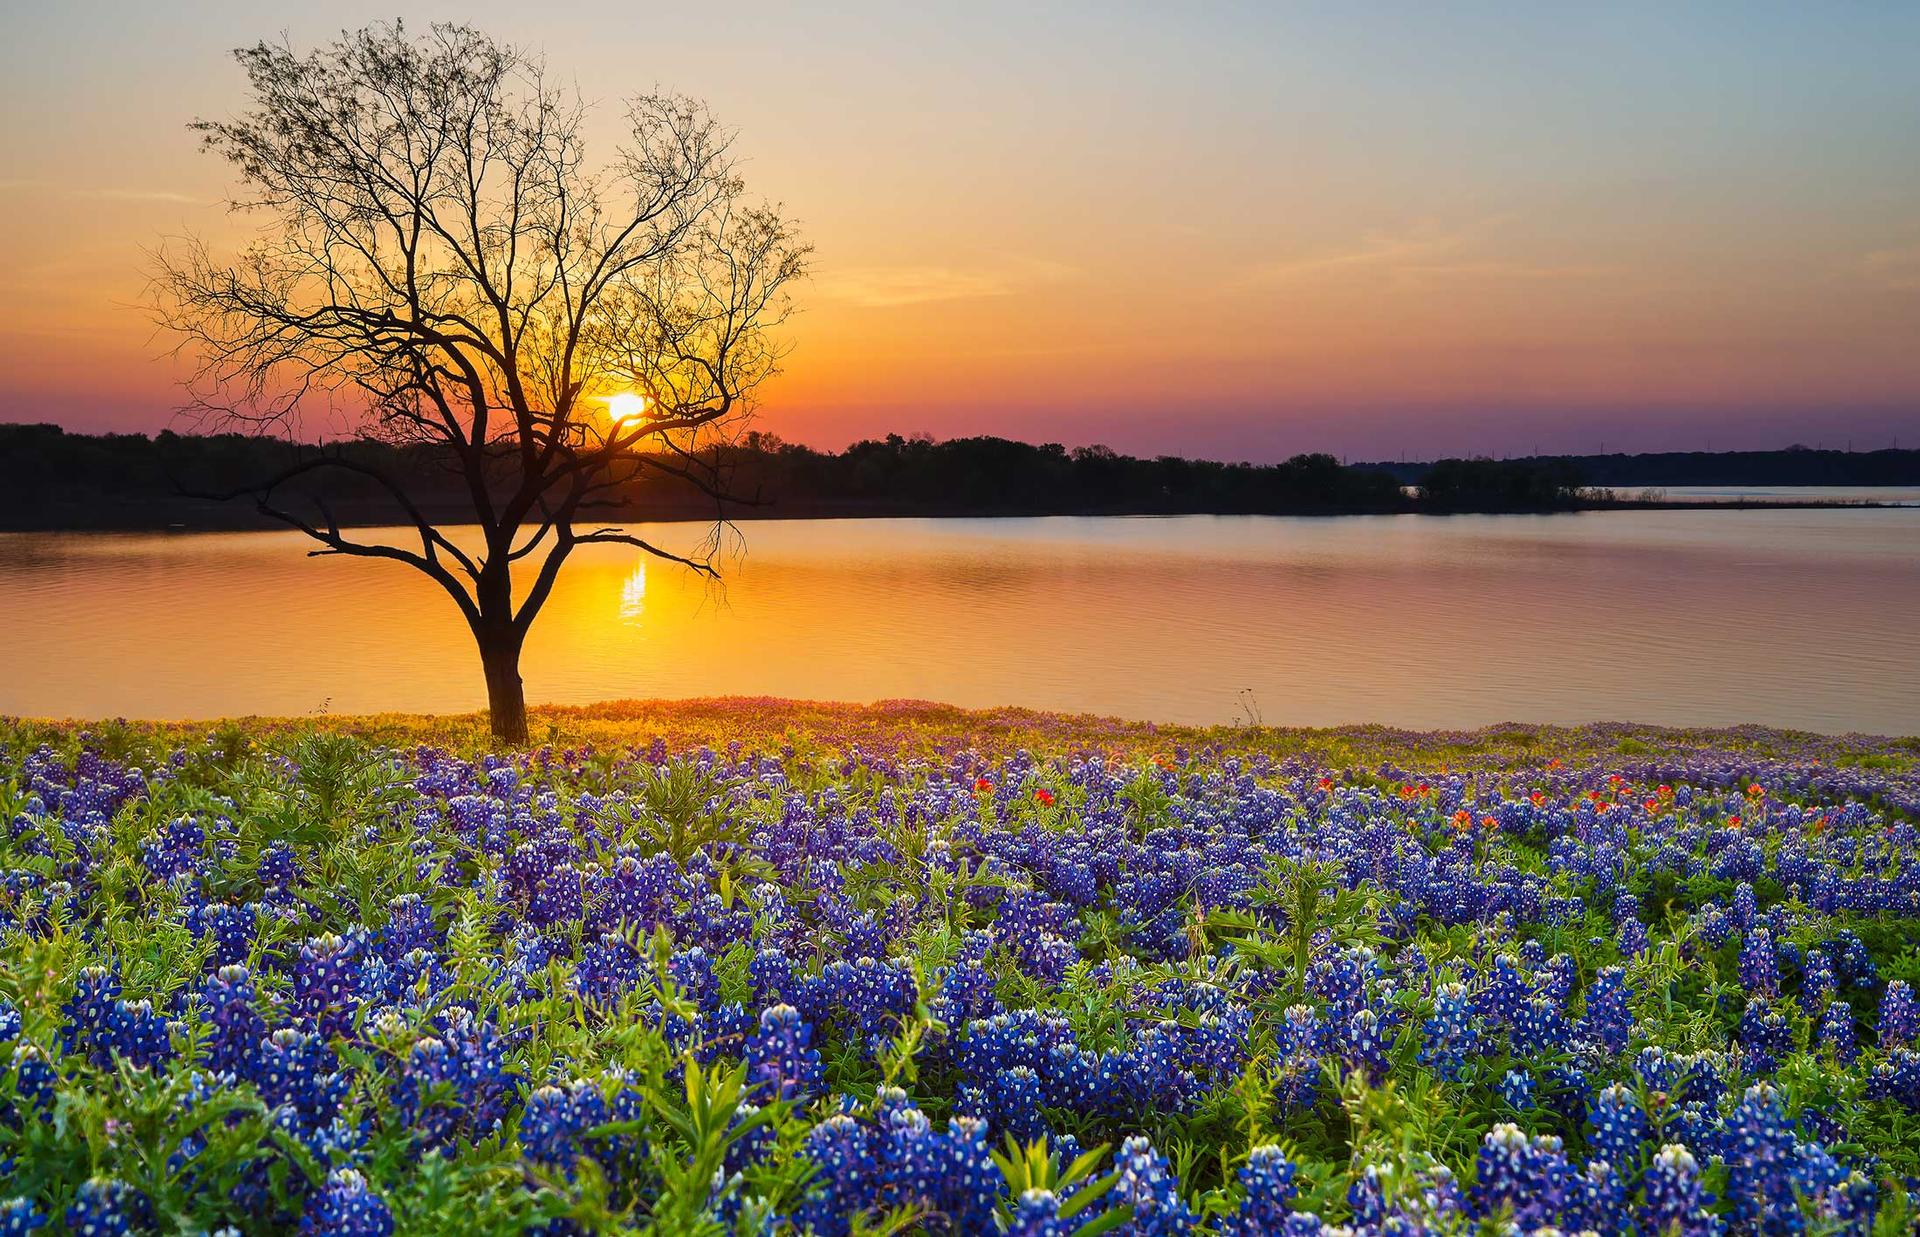 sunset with tree and bluebonnets